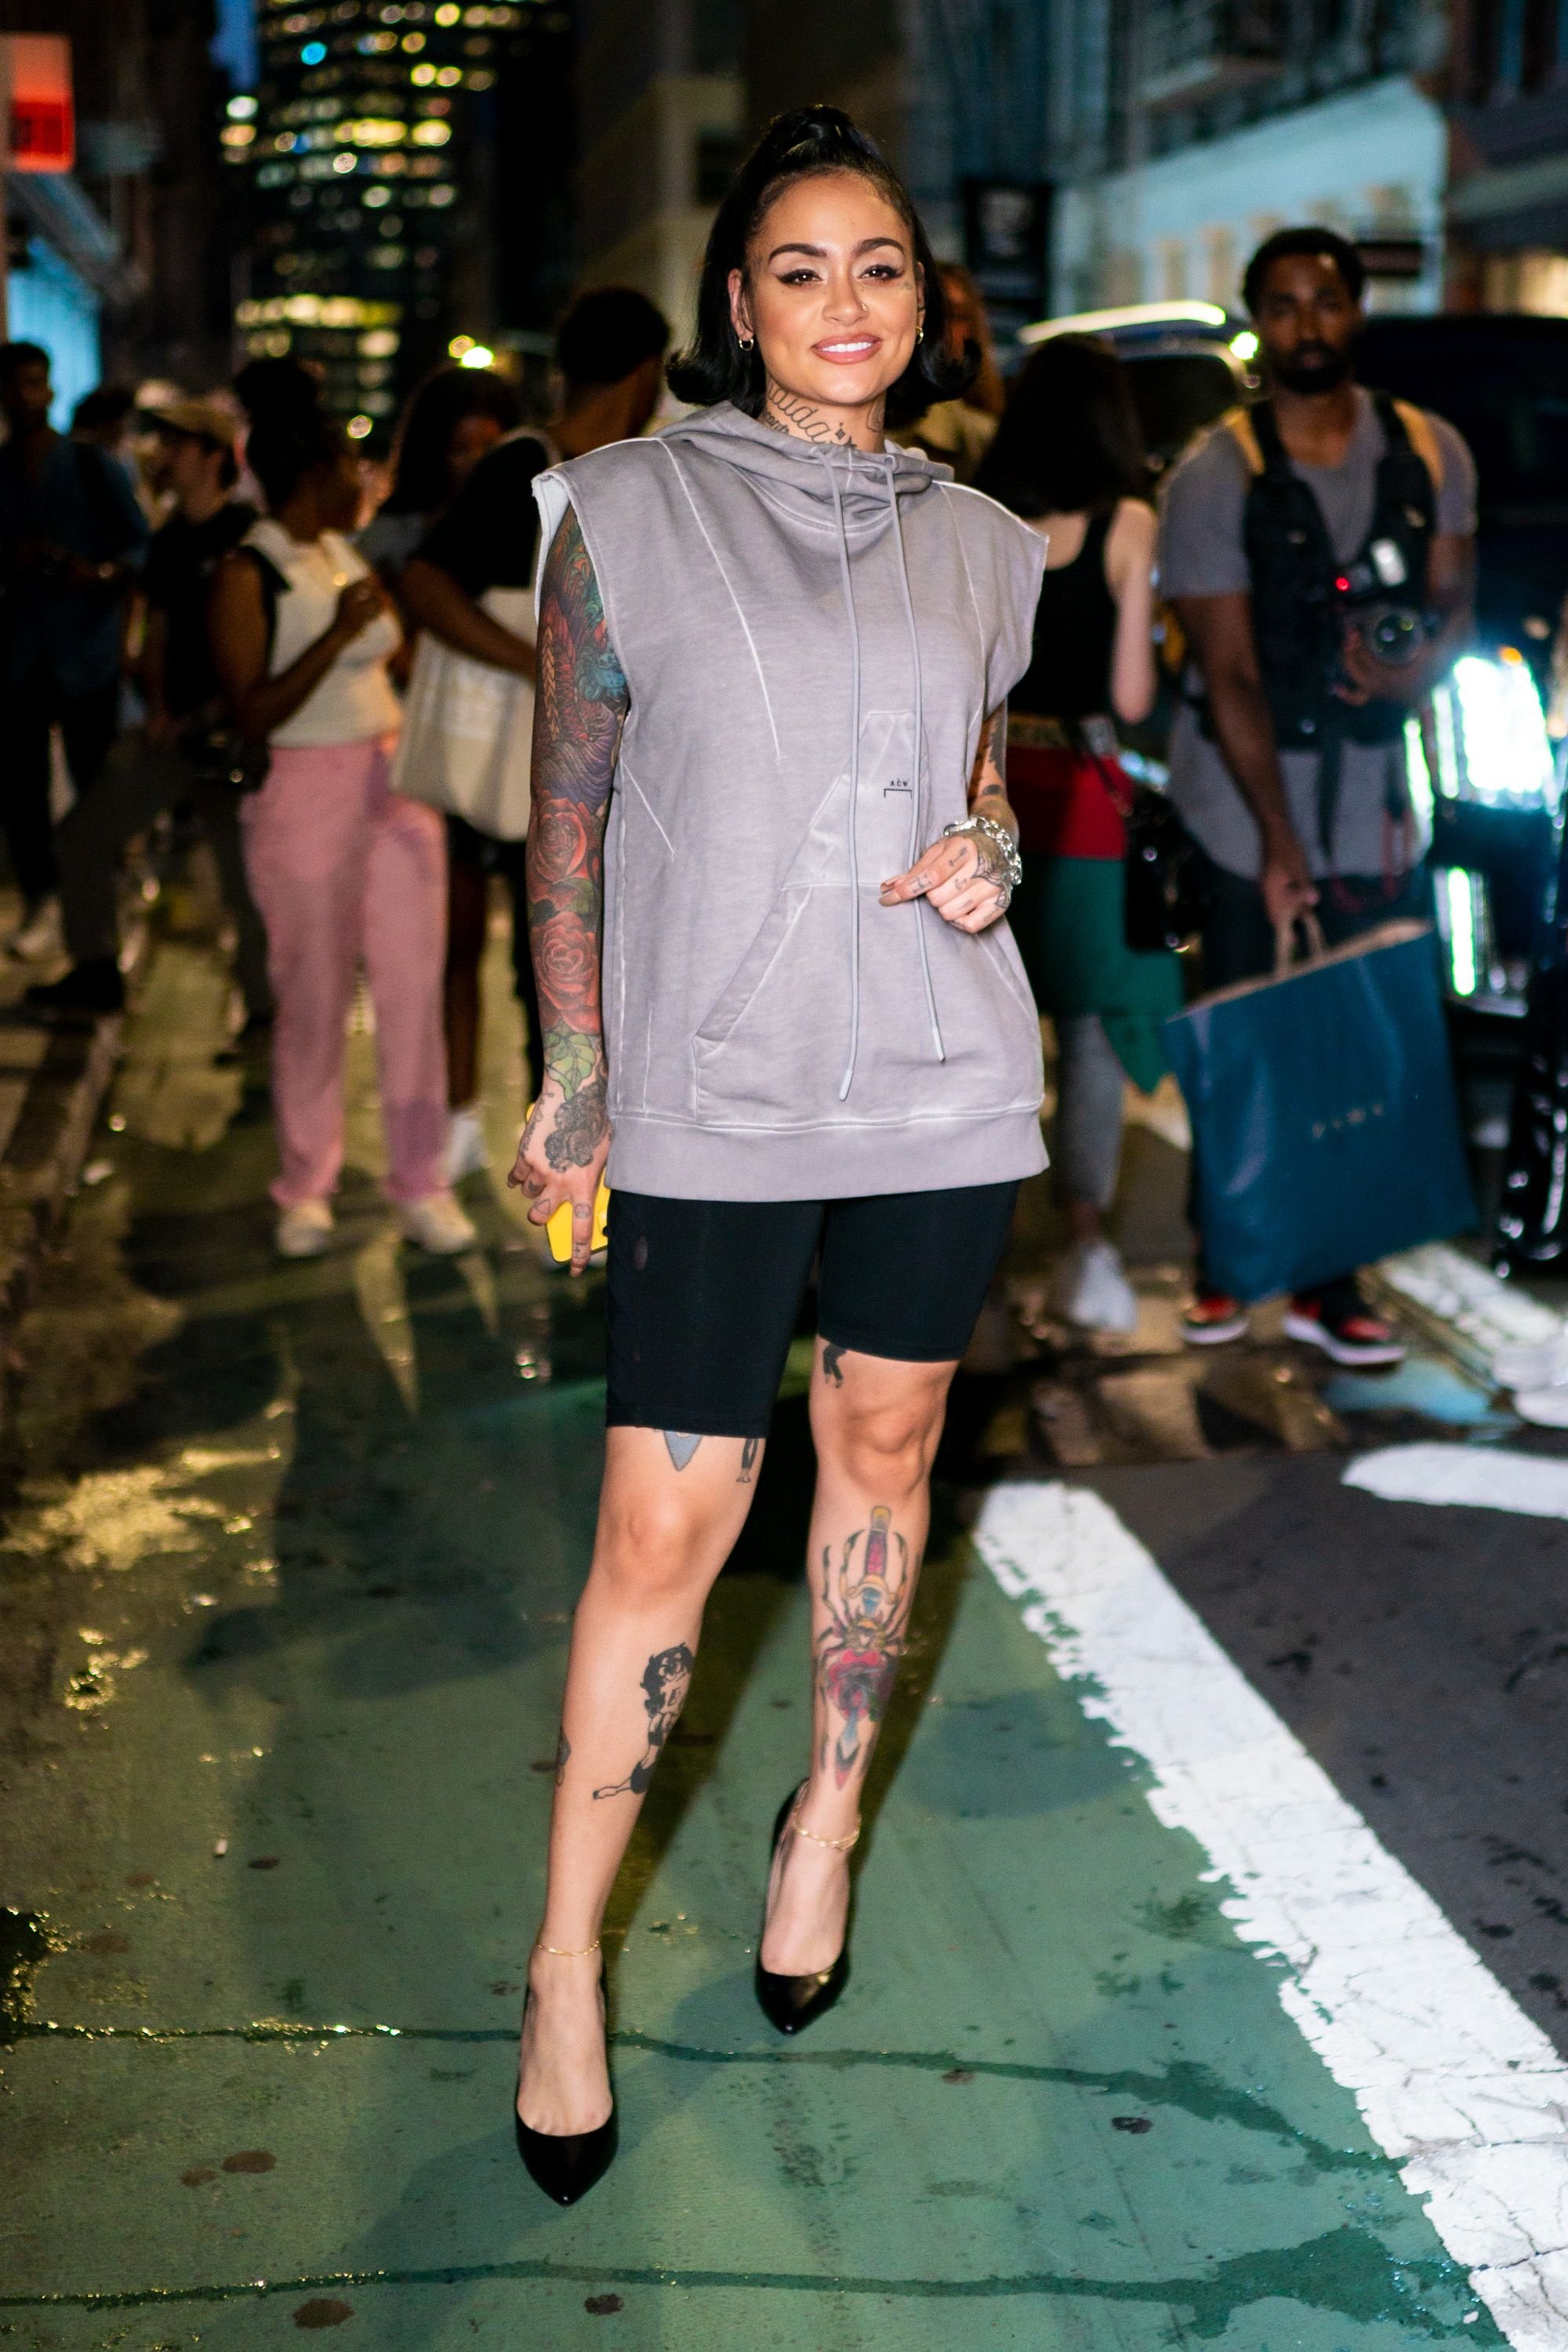 Kehlani attends Diesel x A-Cold-Wall capsule collection launch in SoHo on September 09, 2019 in New York City. | Source: Getty Images